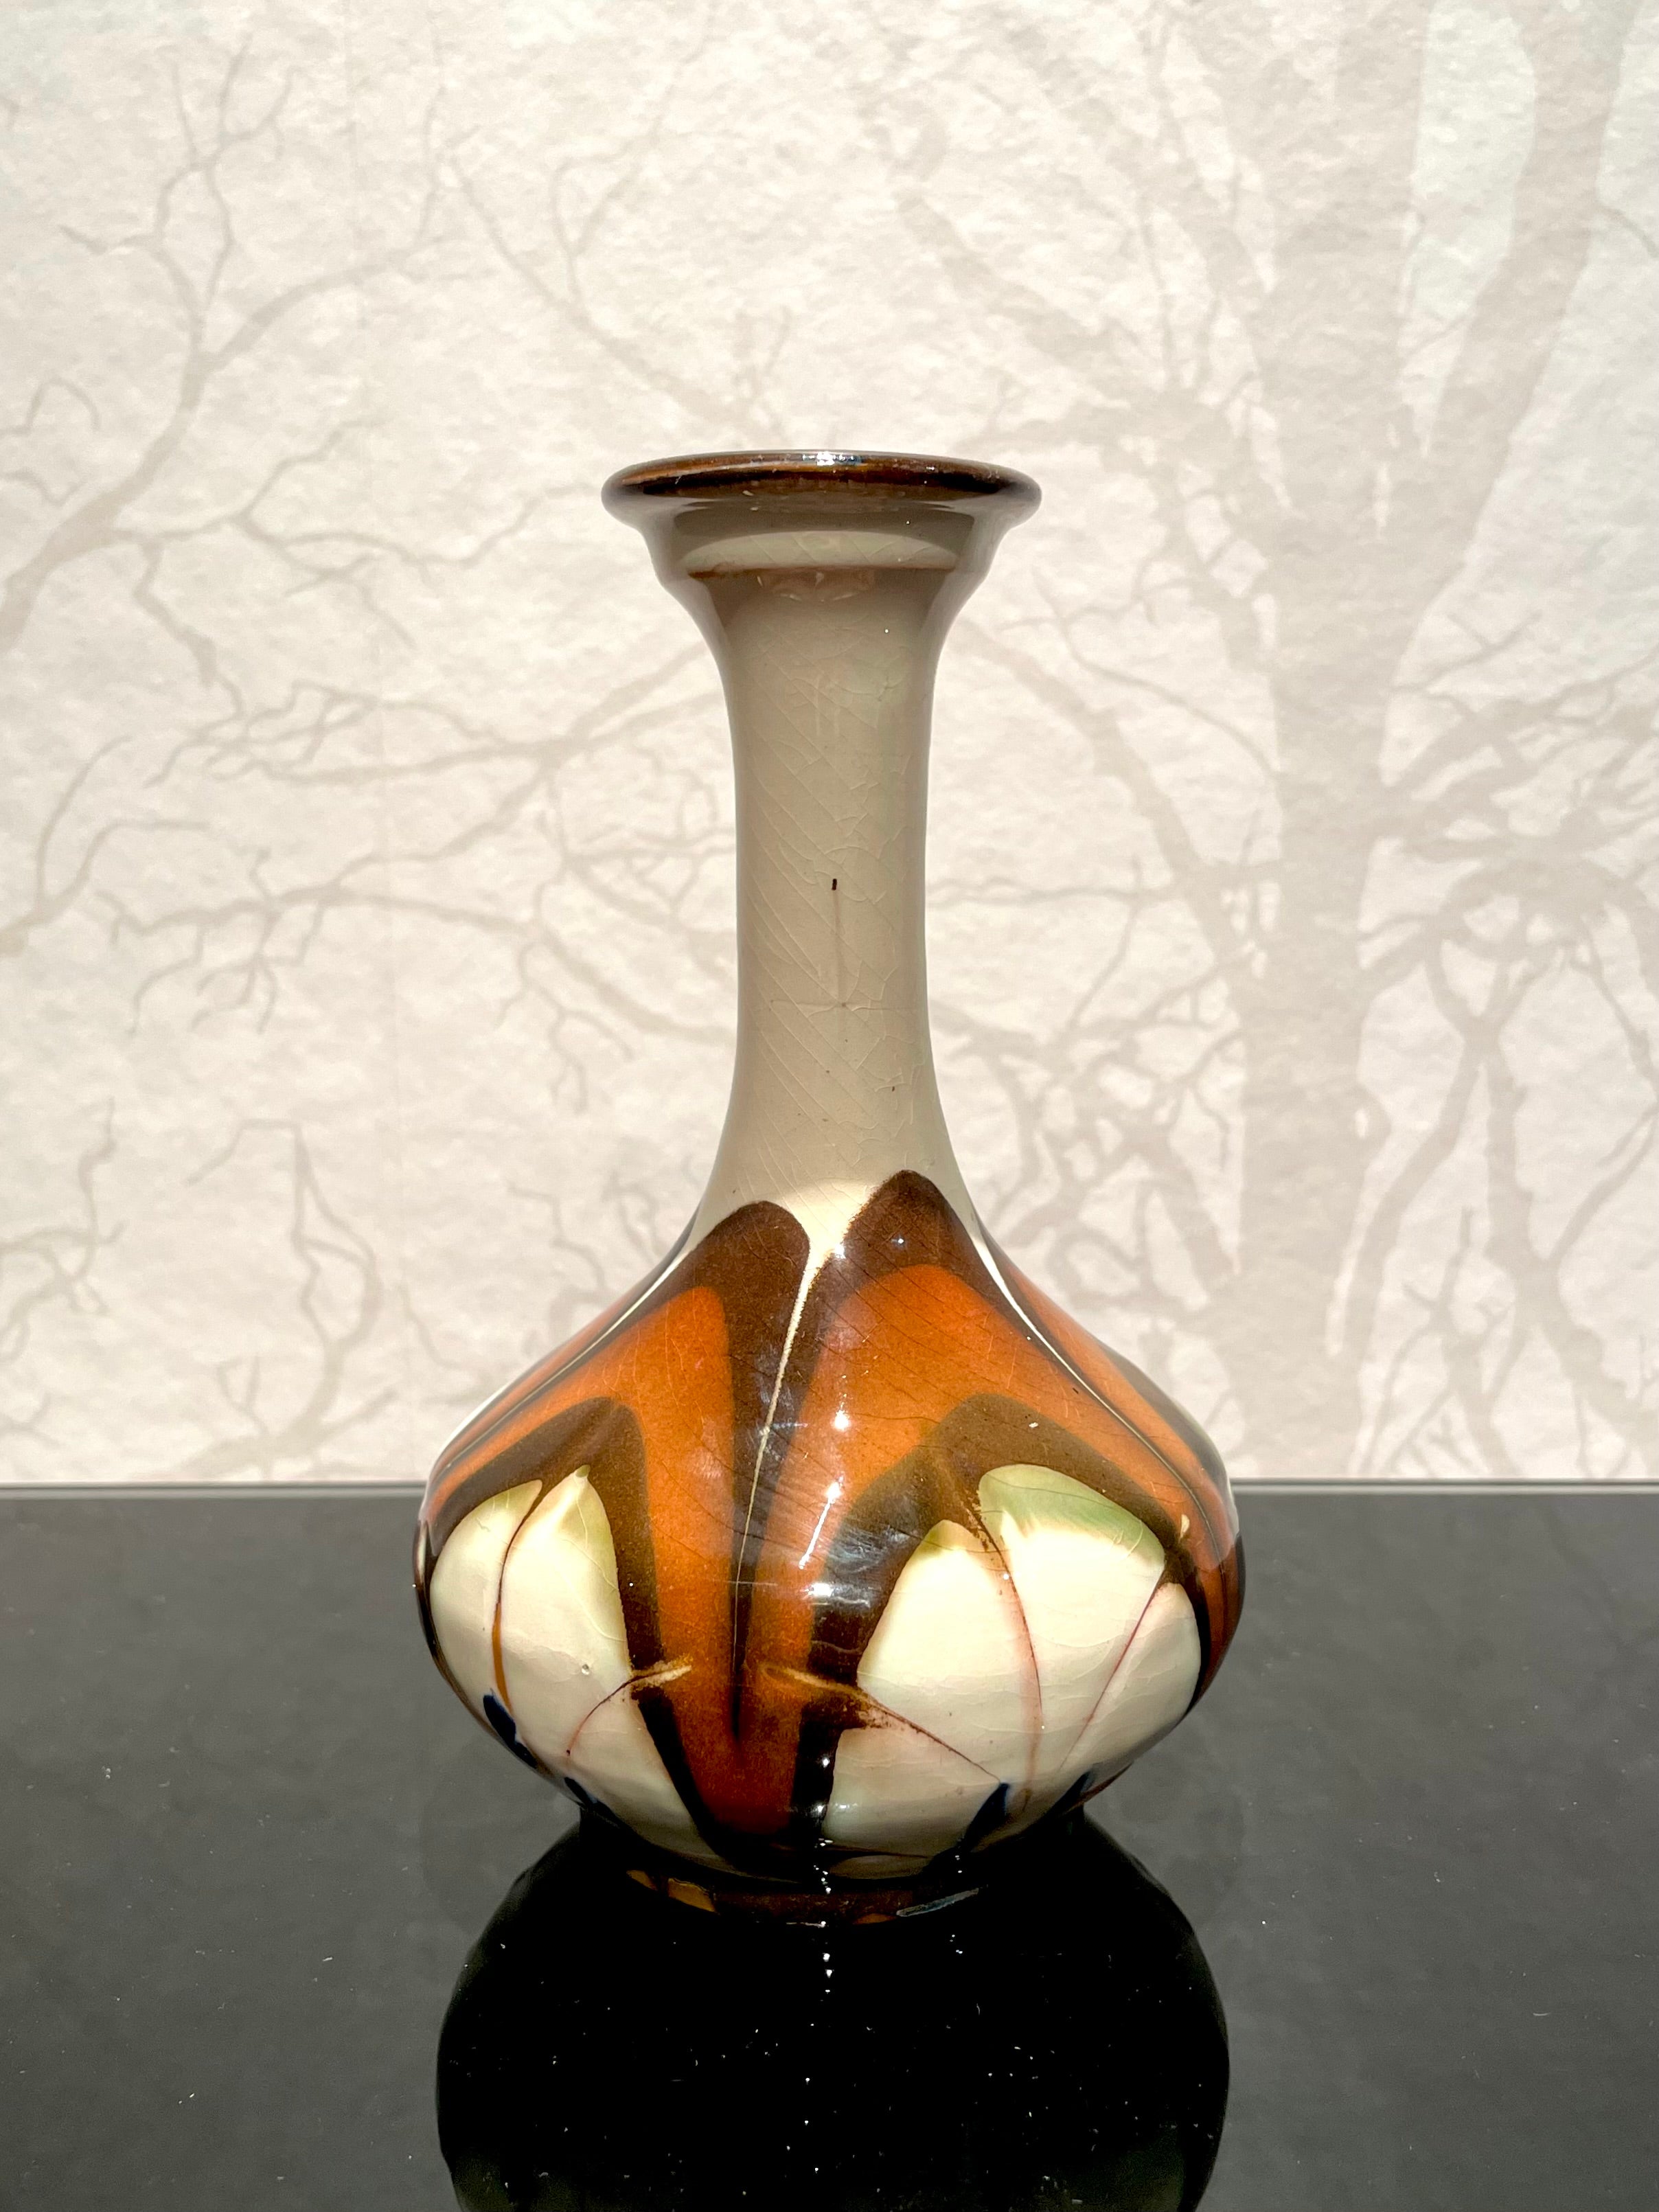 This is a 1920s Danish 16.5 cm high necked ceramic vase by Herman Kähler. 

It comes with a baluster shaped body. It has a glossy surface, cow horn glazed pattern like flowers. Brown and green colors on a creamy white background with forget-me-not